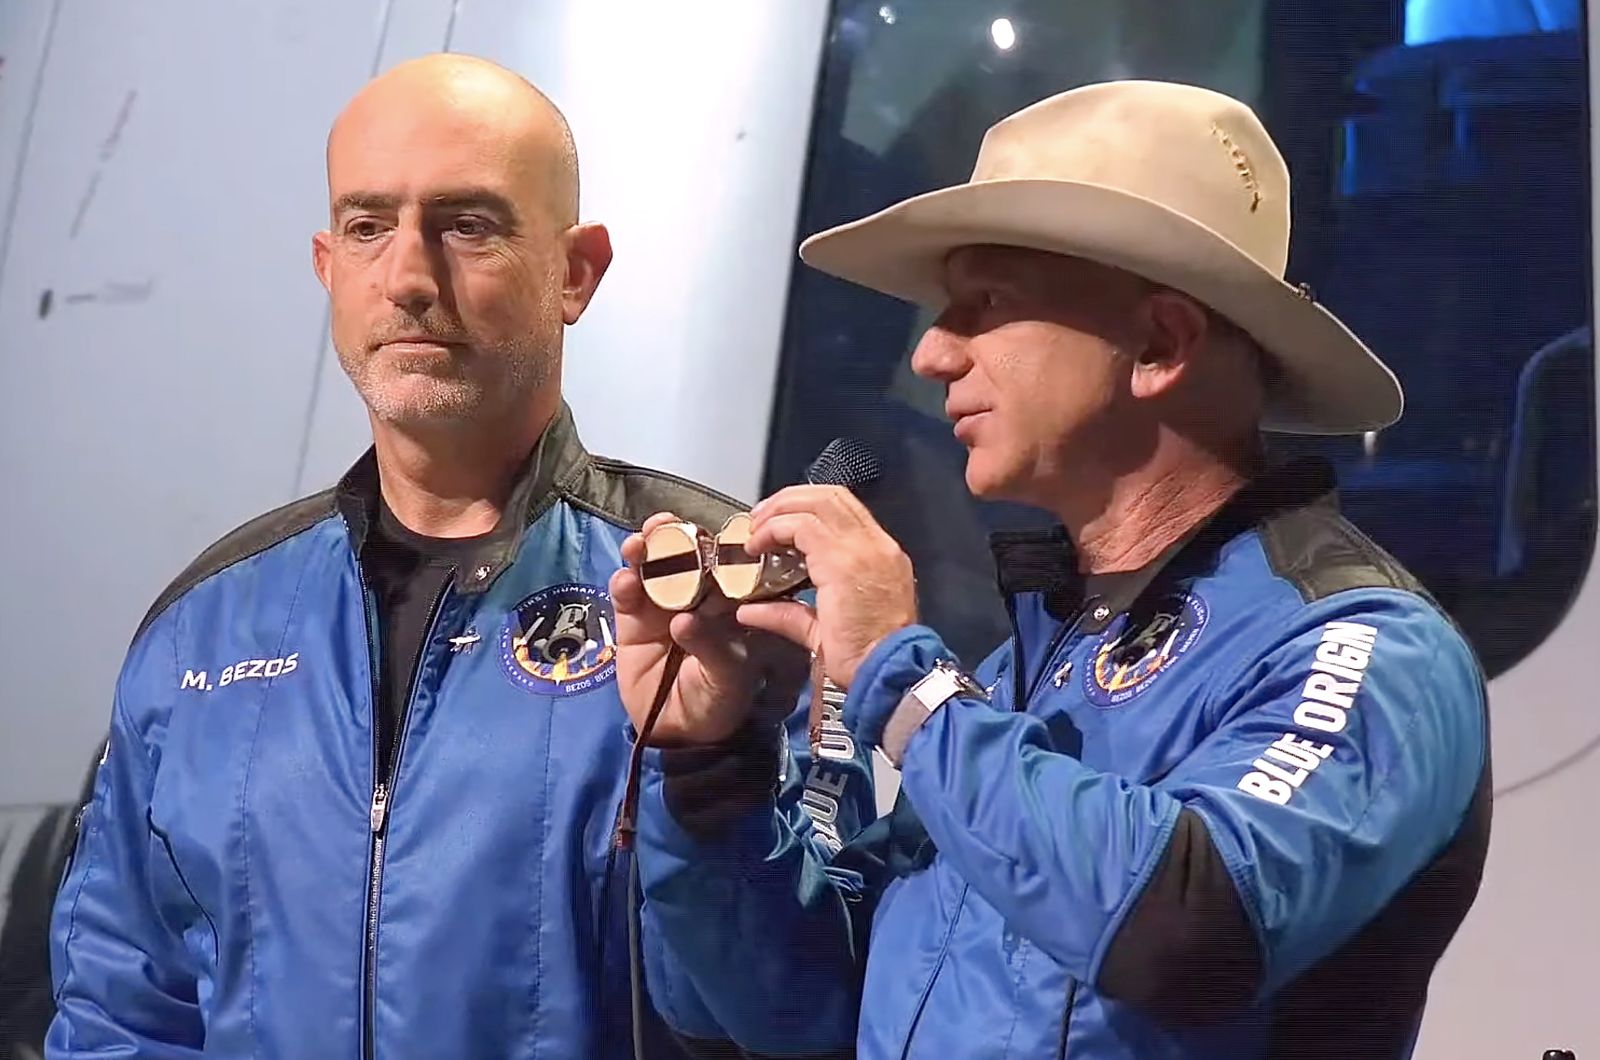 epa09355317 A frame grab from a Blue Origin handout video showing Jeff Bezos (R) and Mark Bezos during a press conference after Blue Origin New Shepard made a trip to space following lift off from Launch Site One, Texas, USA, 20 July 2021.  EPA/BLUE ORIGIN / HANDOUT  HANDOUT EDITORIAL USE ONLY/NO SALES